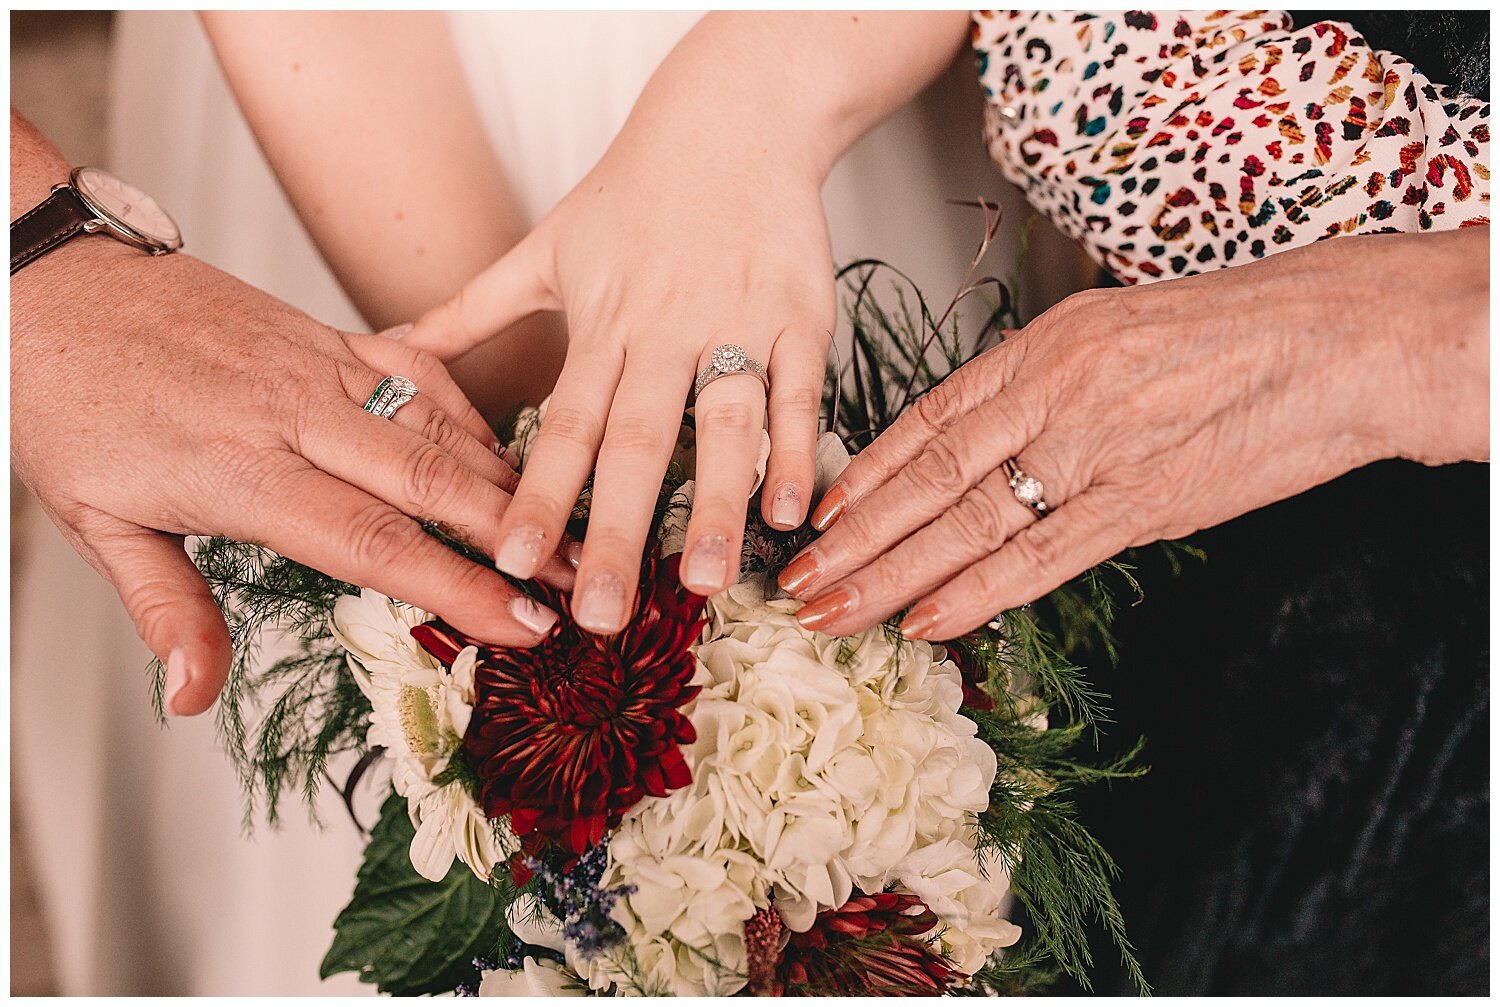  These are the wedding rings of the bride, her mom and her grandma. Such a sweet keepsake this photo will be!  